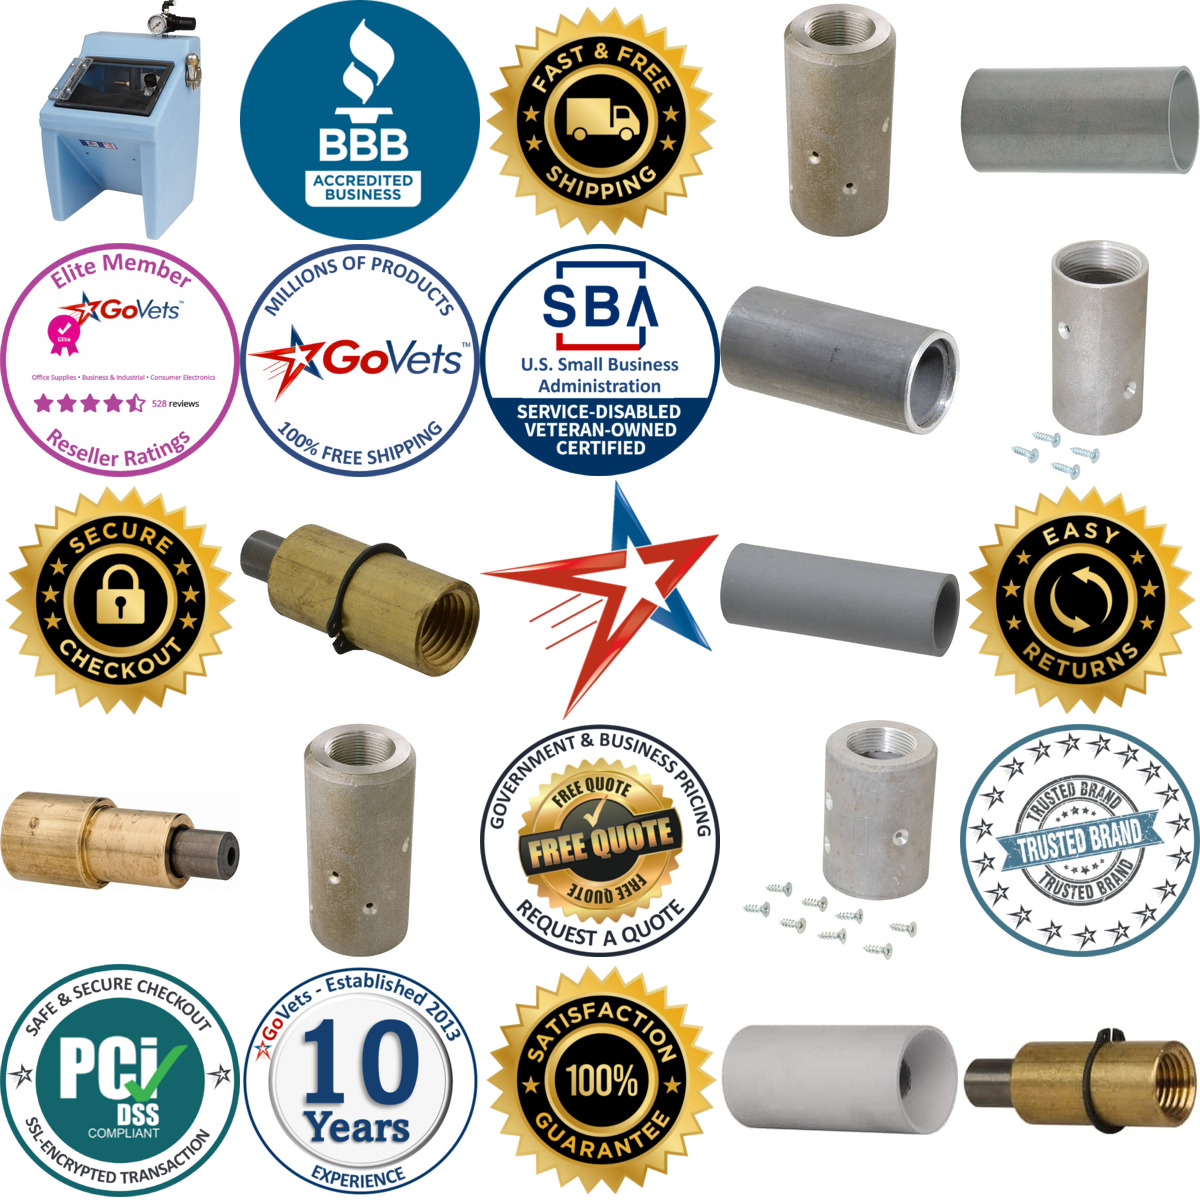 A selection of Nozzles and Jets products on GoVets